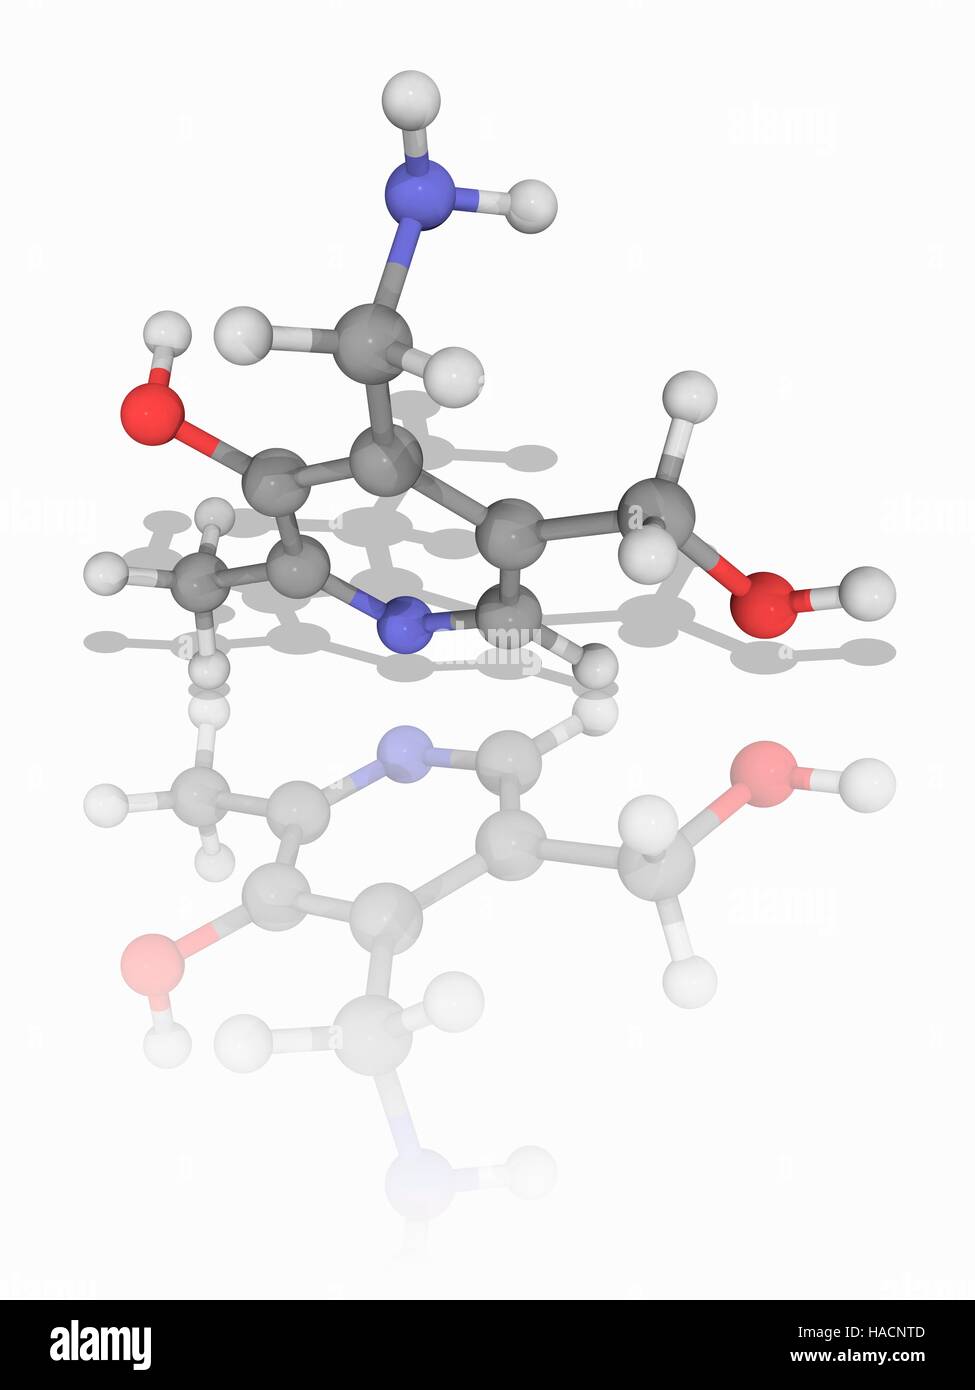 Pyridoxamine. Molecular model of the pyridoxamine (C8.H12.N2.O2) form of vitamin B6. This vitamin is required as a cofactor in reactions of amino acids, lipids and glucose. Atoms are represented as spheres and are colour-coded: carbon (grey), hydrogen (white), nitrogen (blue) and oxygen (red). Illustration. Stock Photo